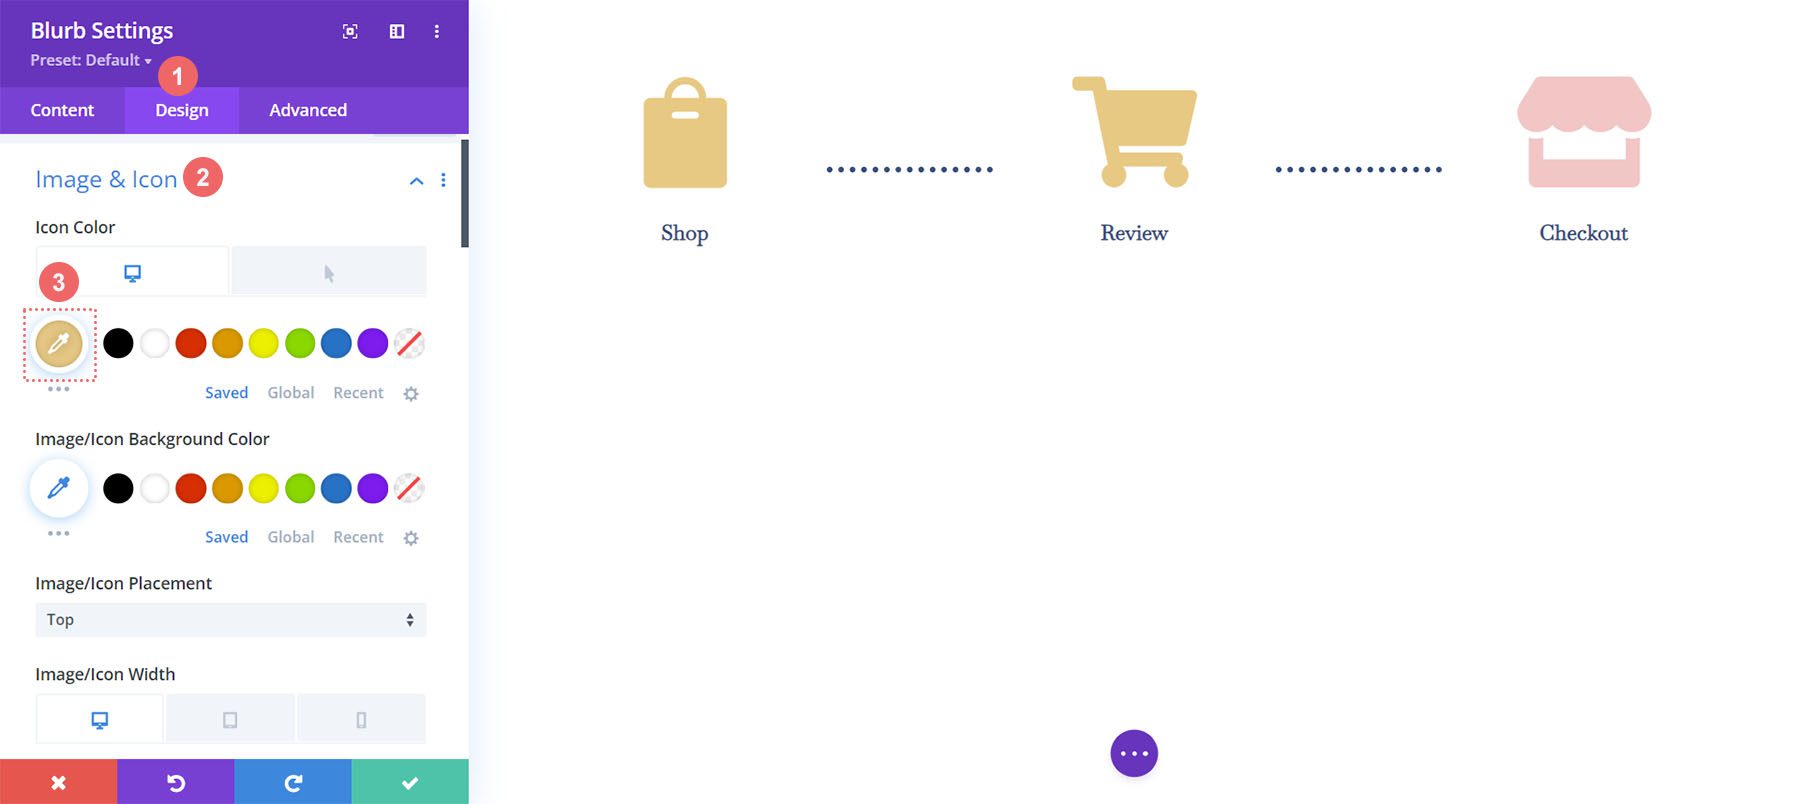 Updated cart icon color on the checkout page template